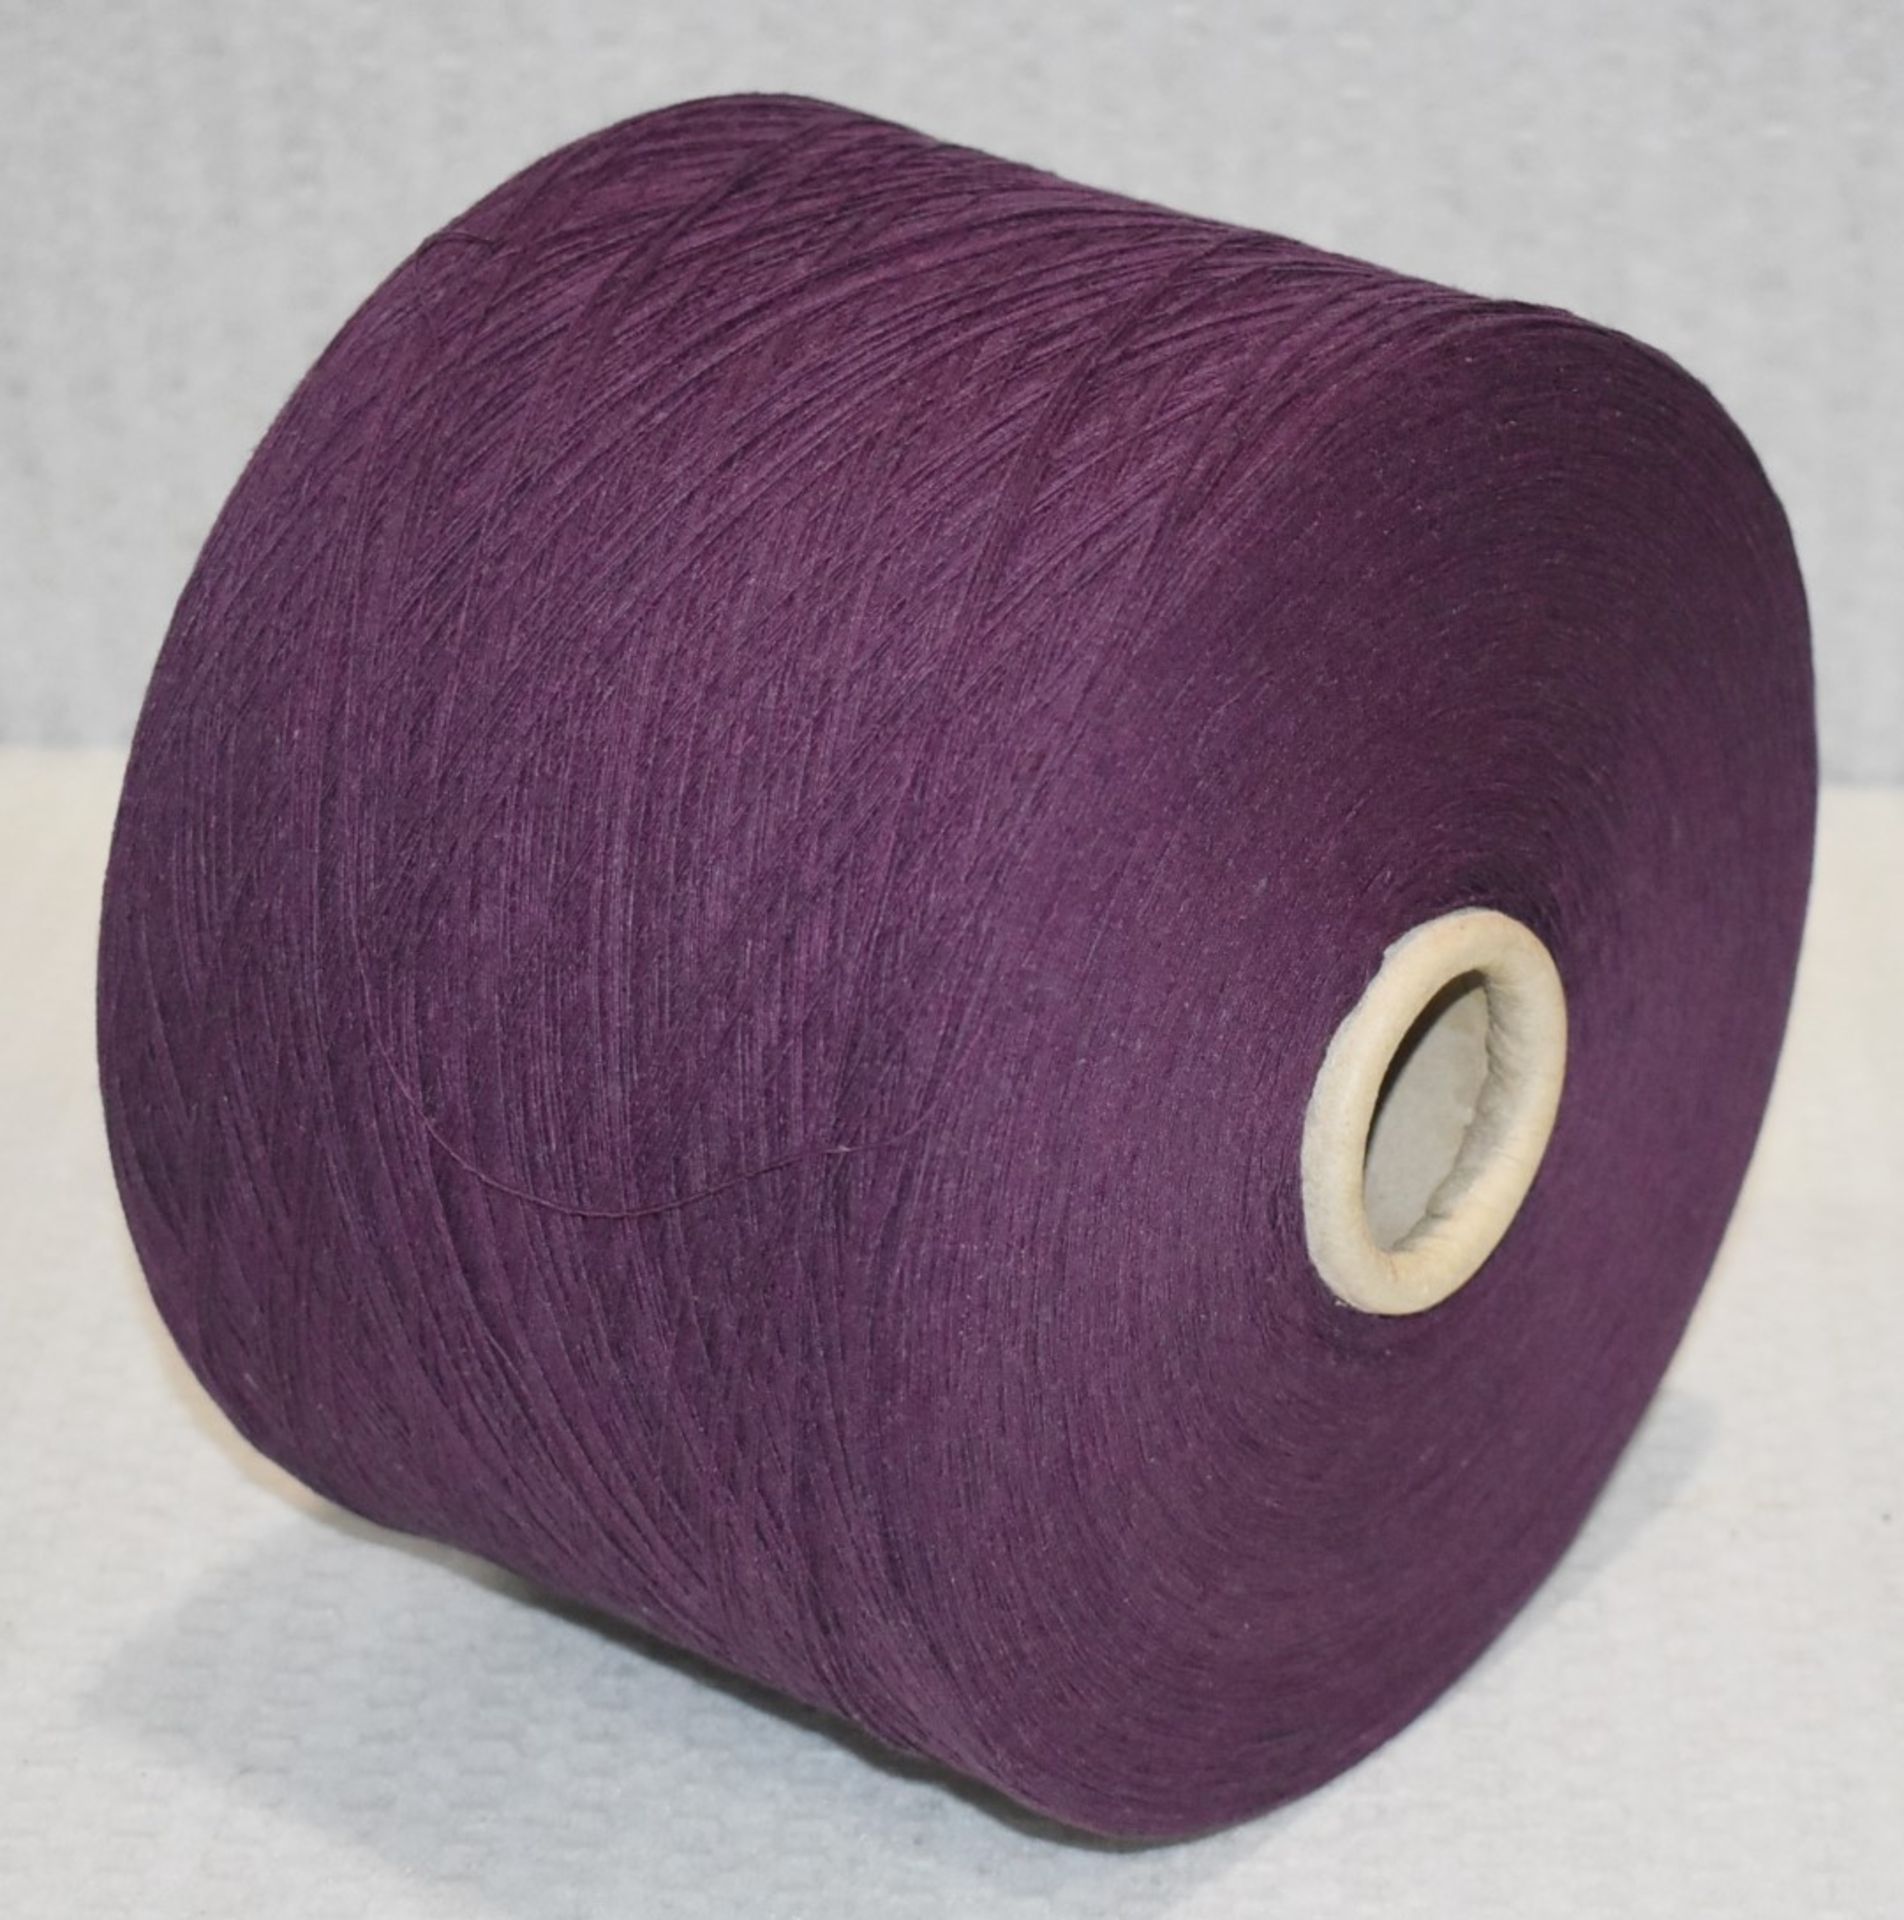 1 x Cone of 1/13 MicroCotton Knitting Yarn - Purple - Approx Weight: 2,300g - New Stock ABL Yarn - Image 4 of 10